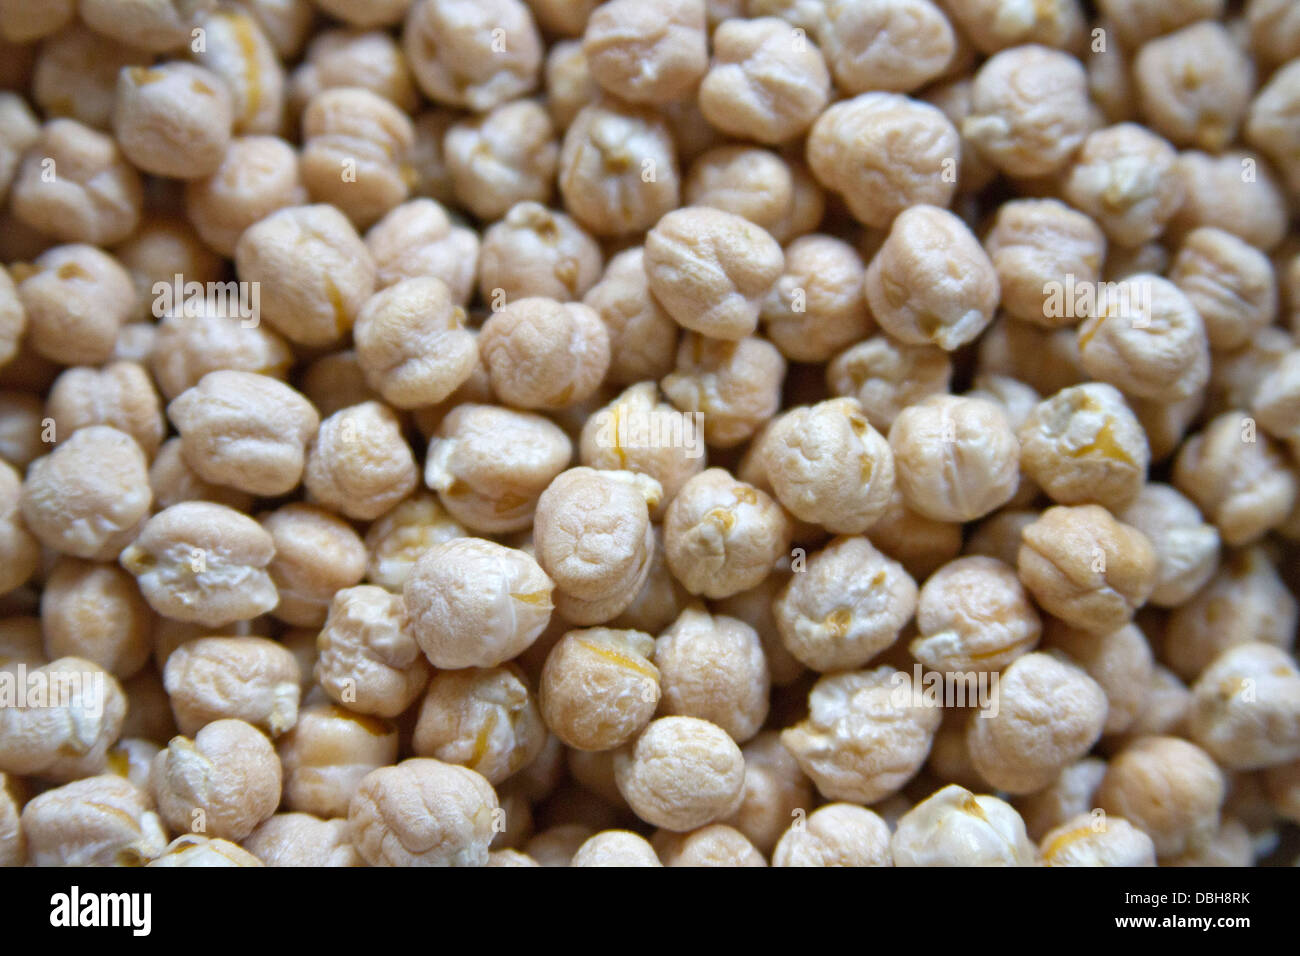 Close up of dried garbanzo beans Stock Photo